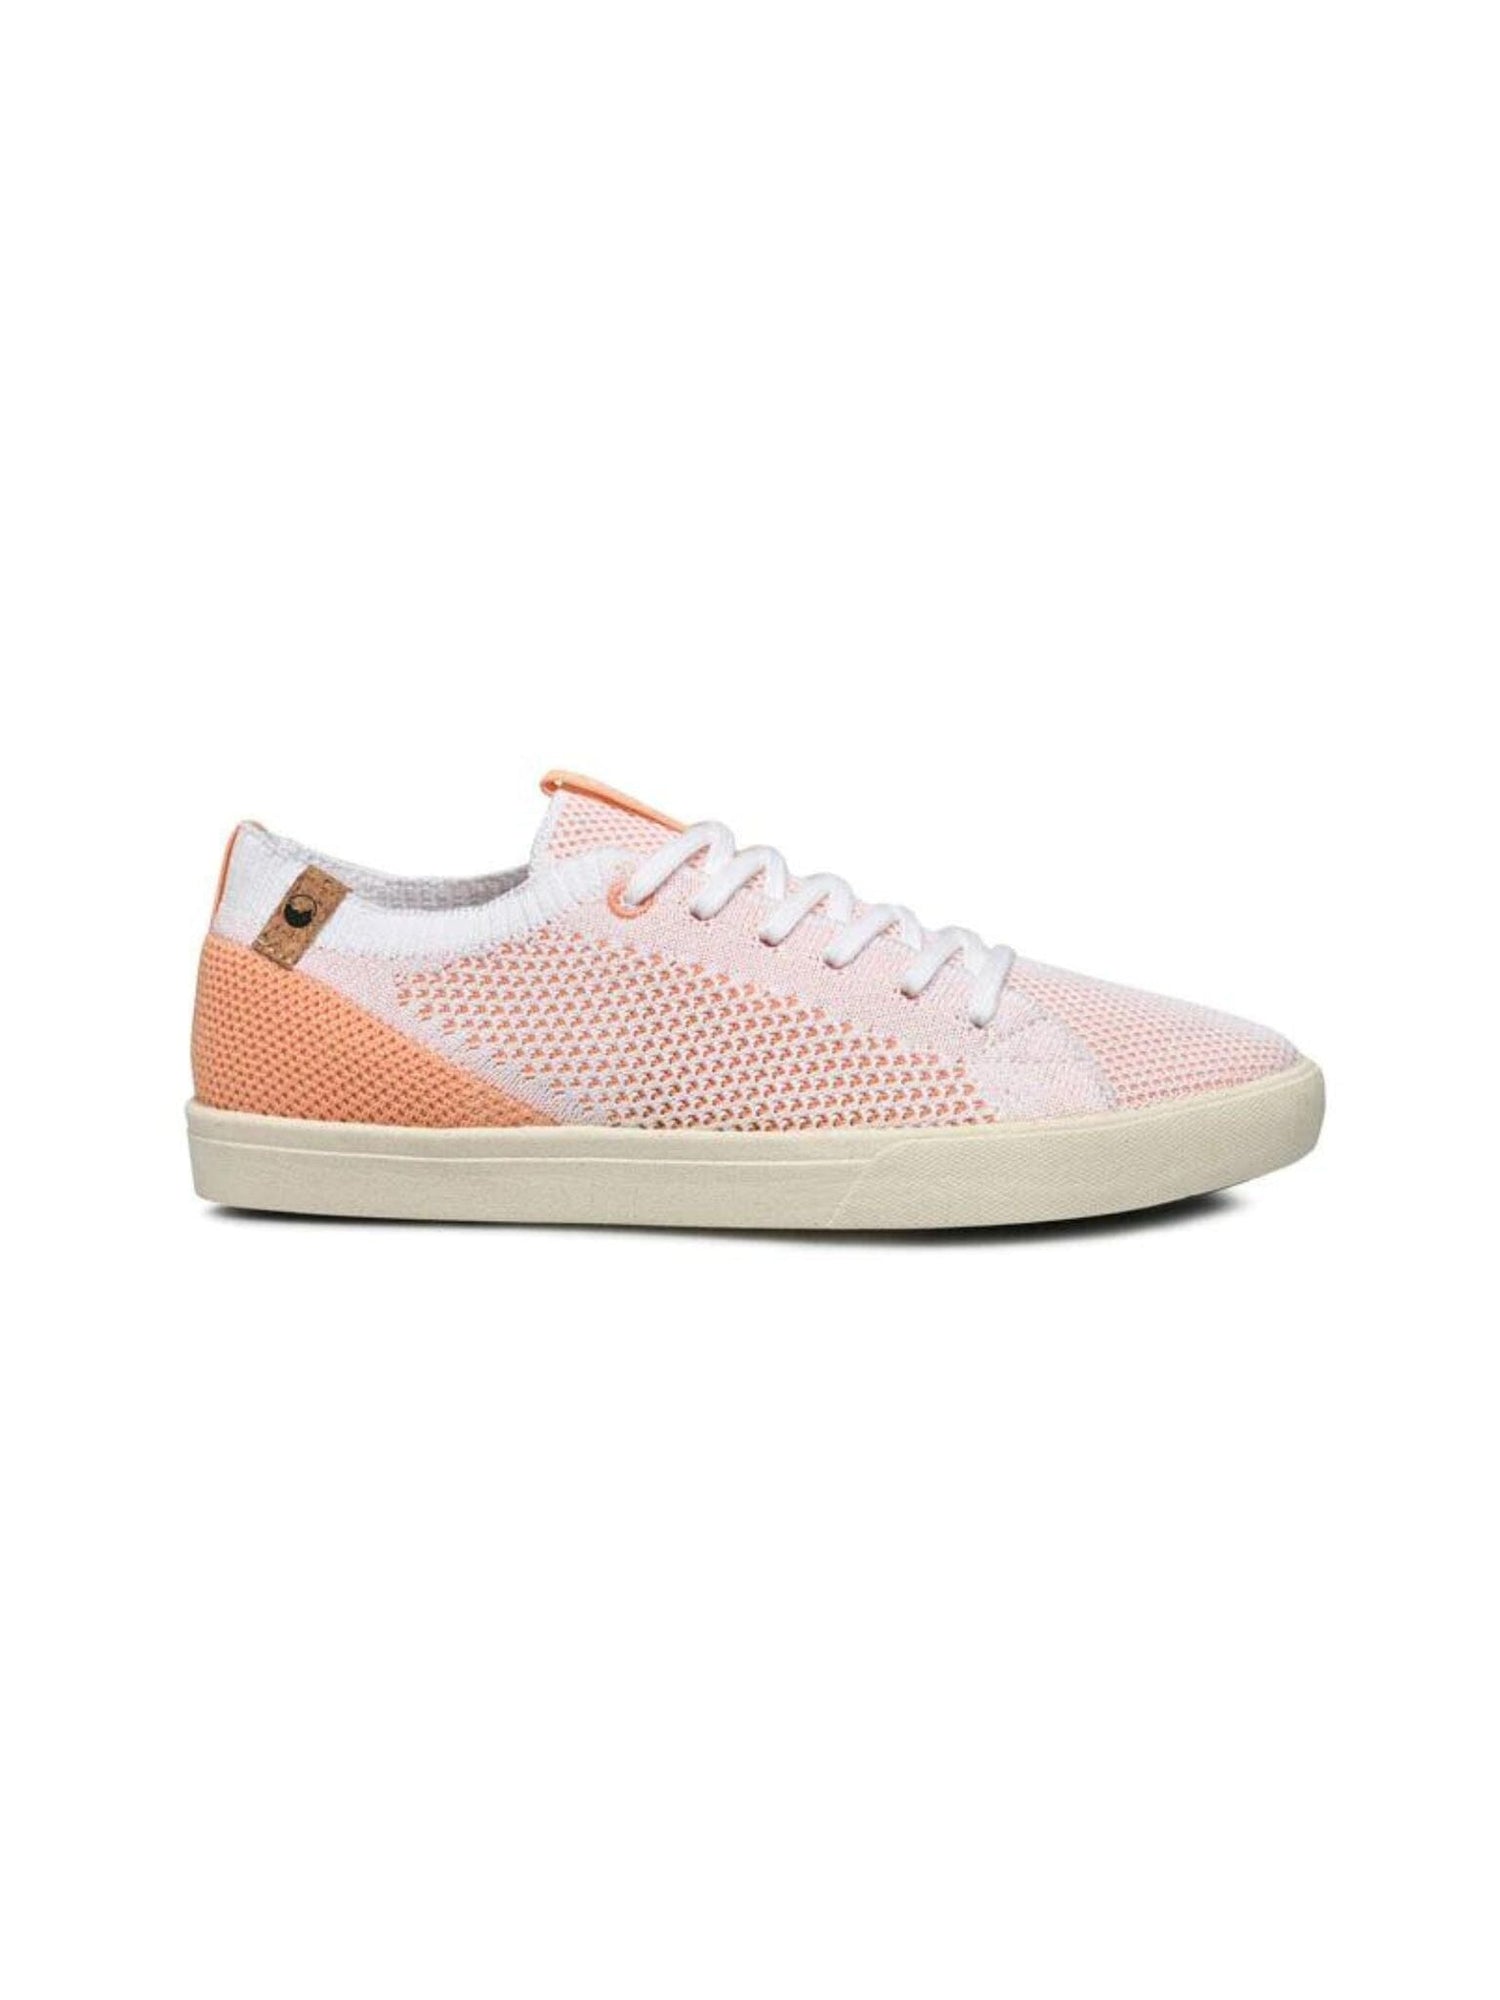 Saola W's Cannon Knit - Recycled PET White Peach Shoes